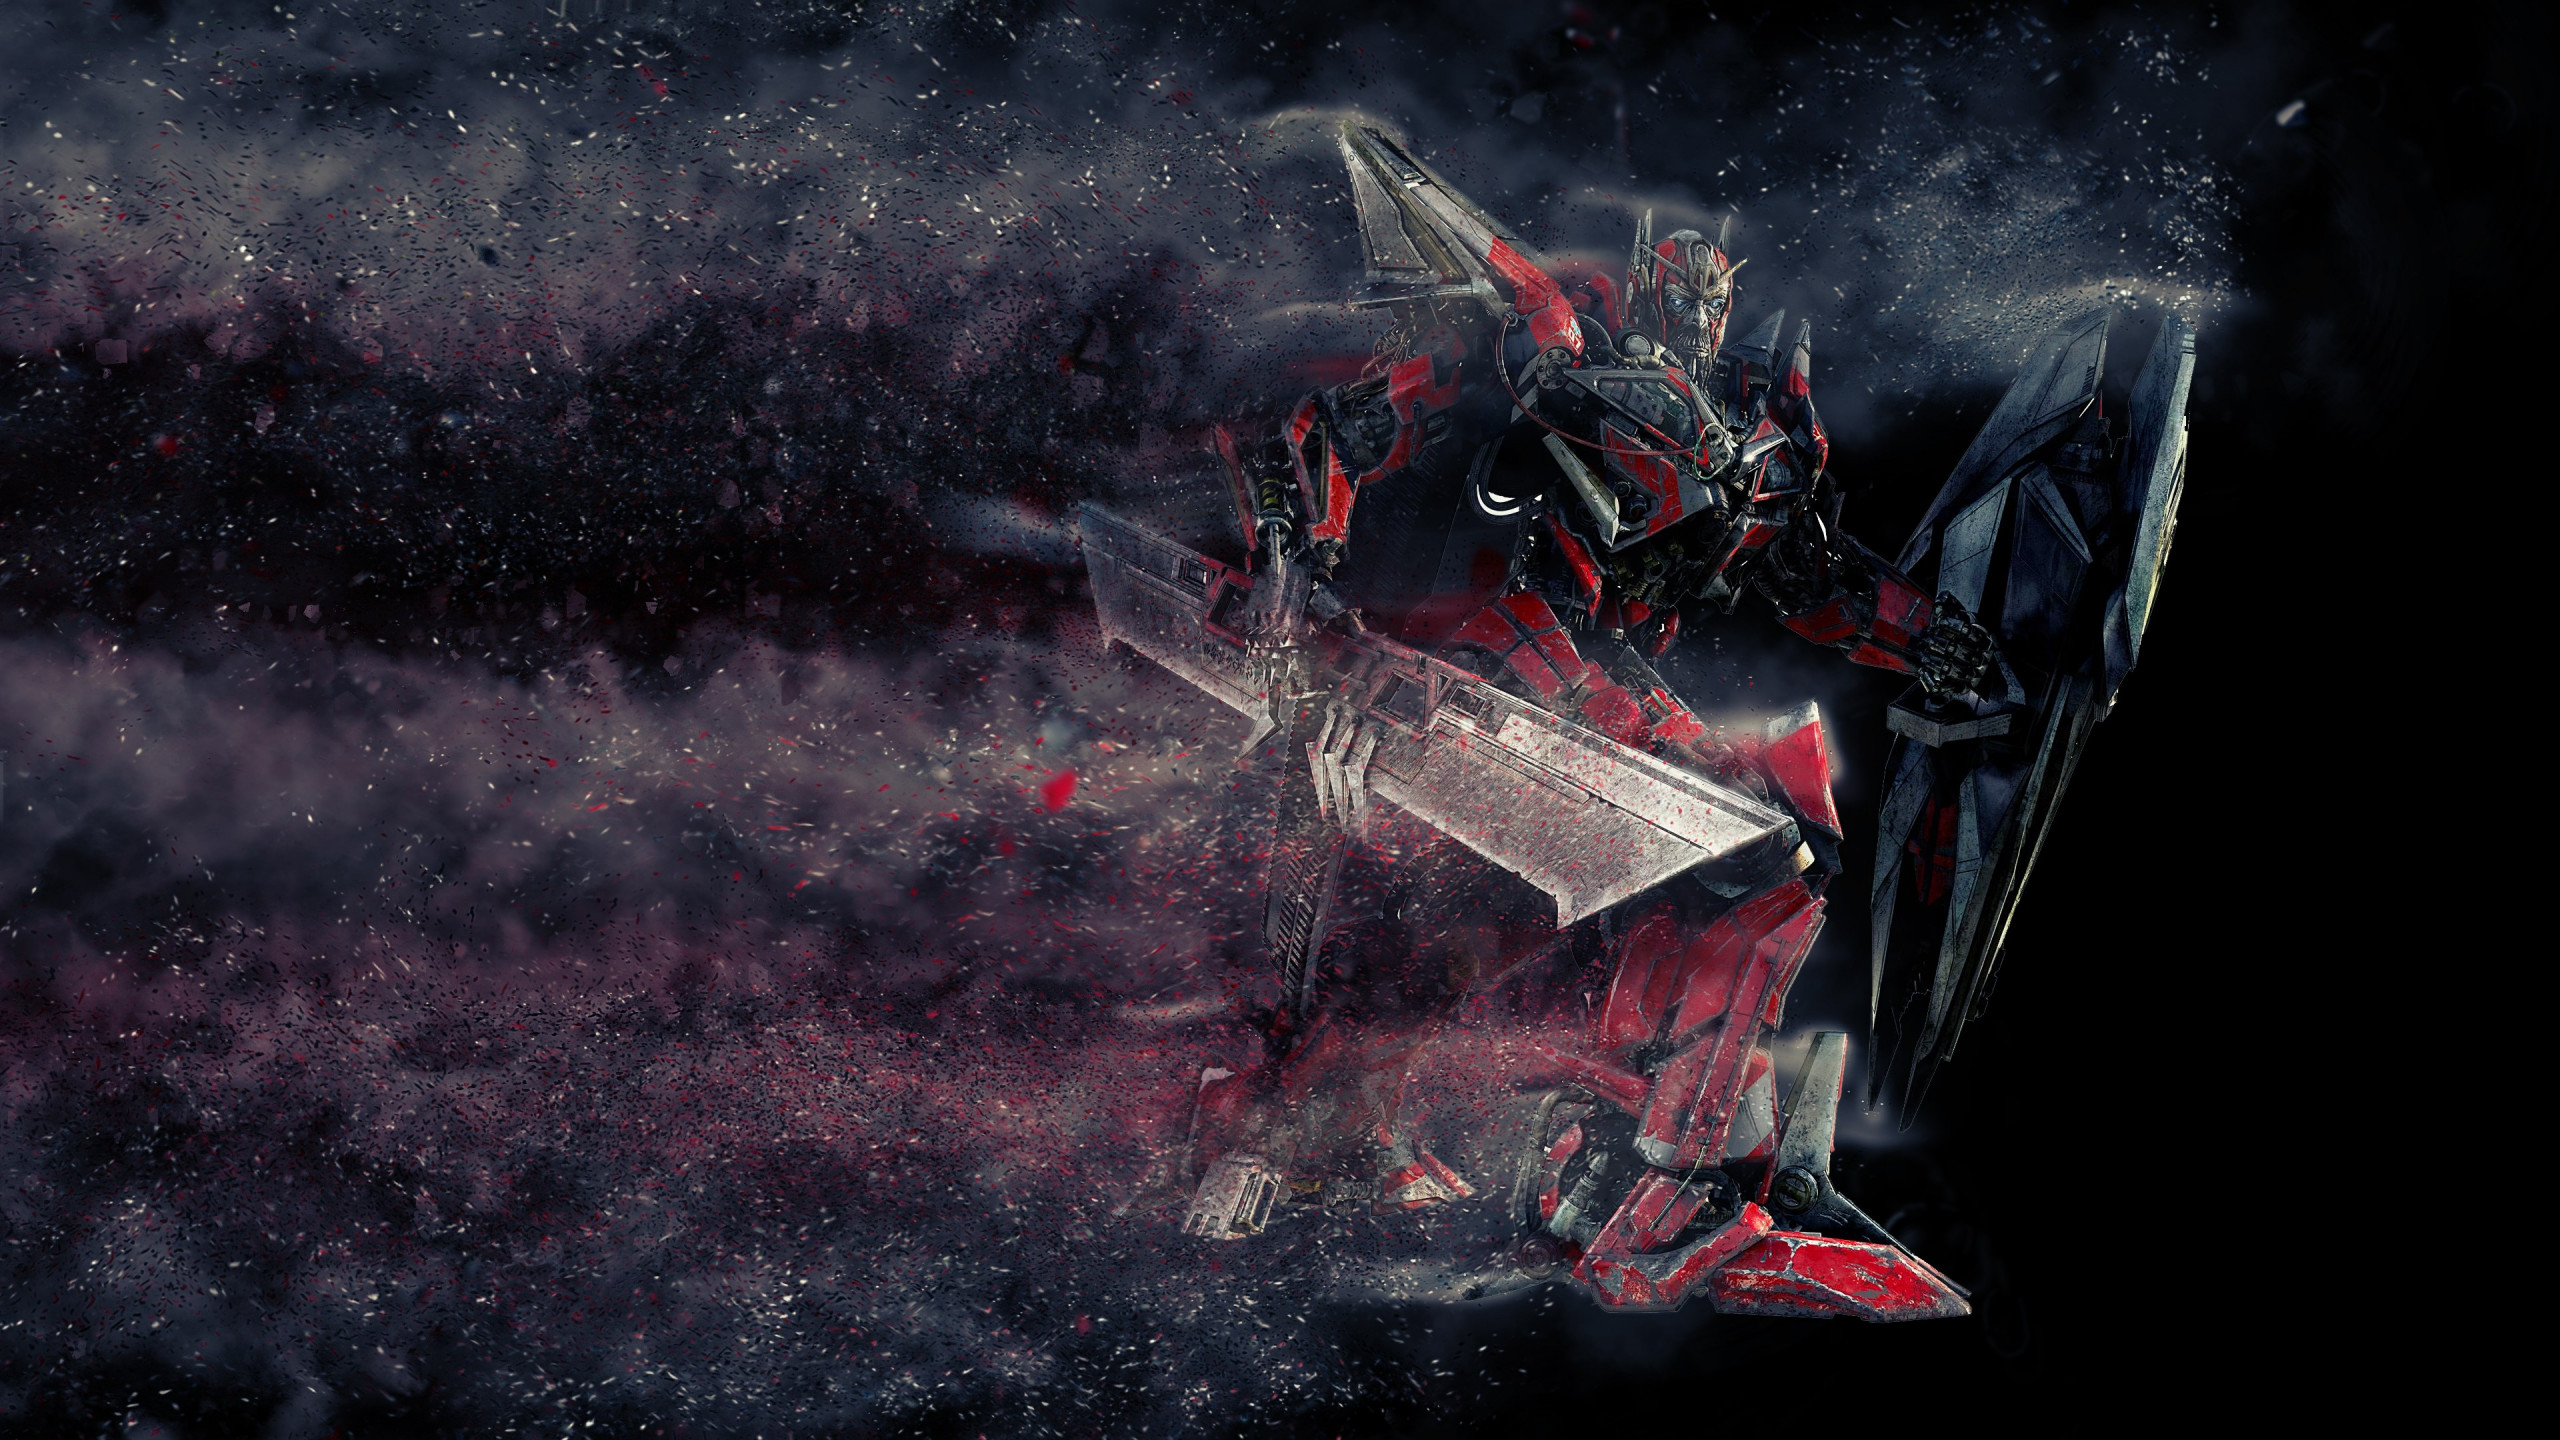 Sentinel Prime from Transformers wallpaper 2560x1440